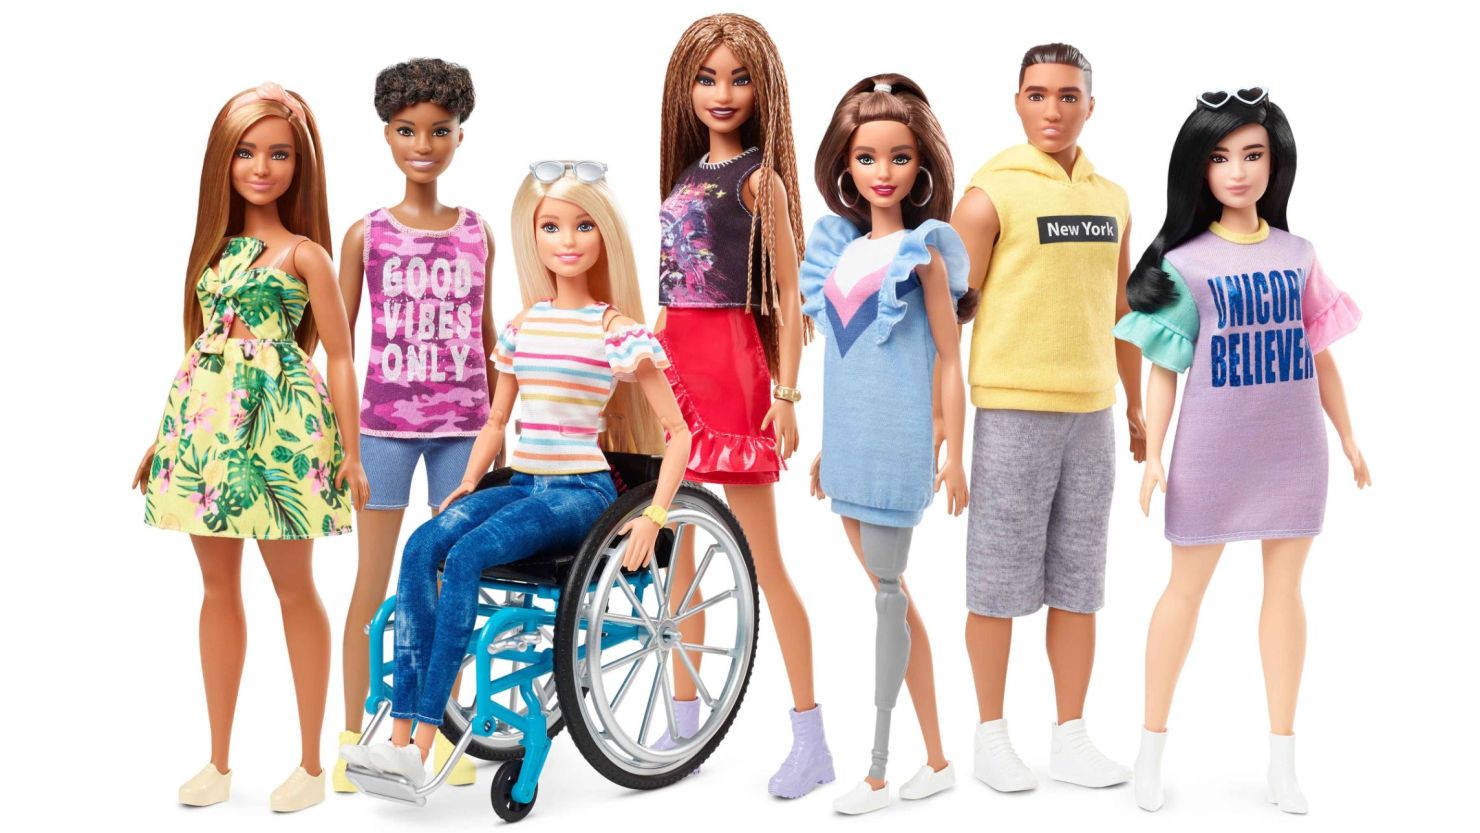 Barbie released this photo of dolls in its new Fashionistas line.